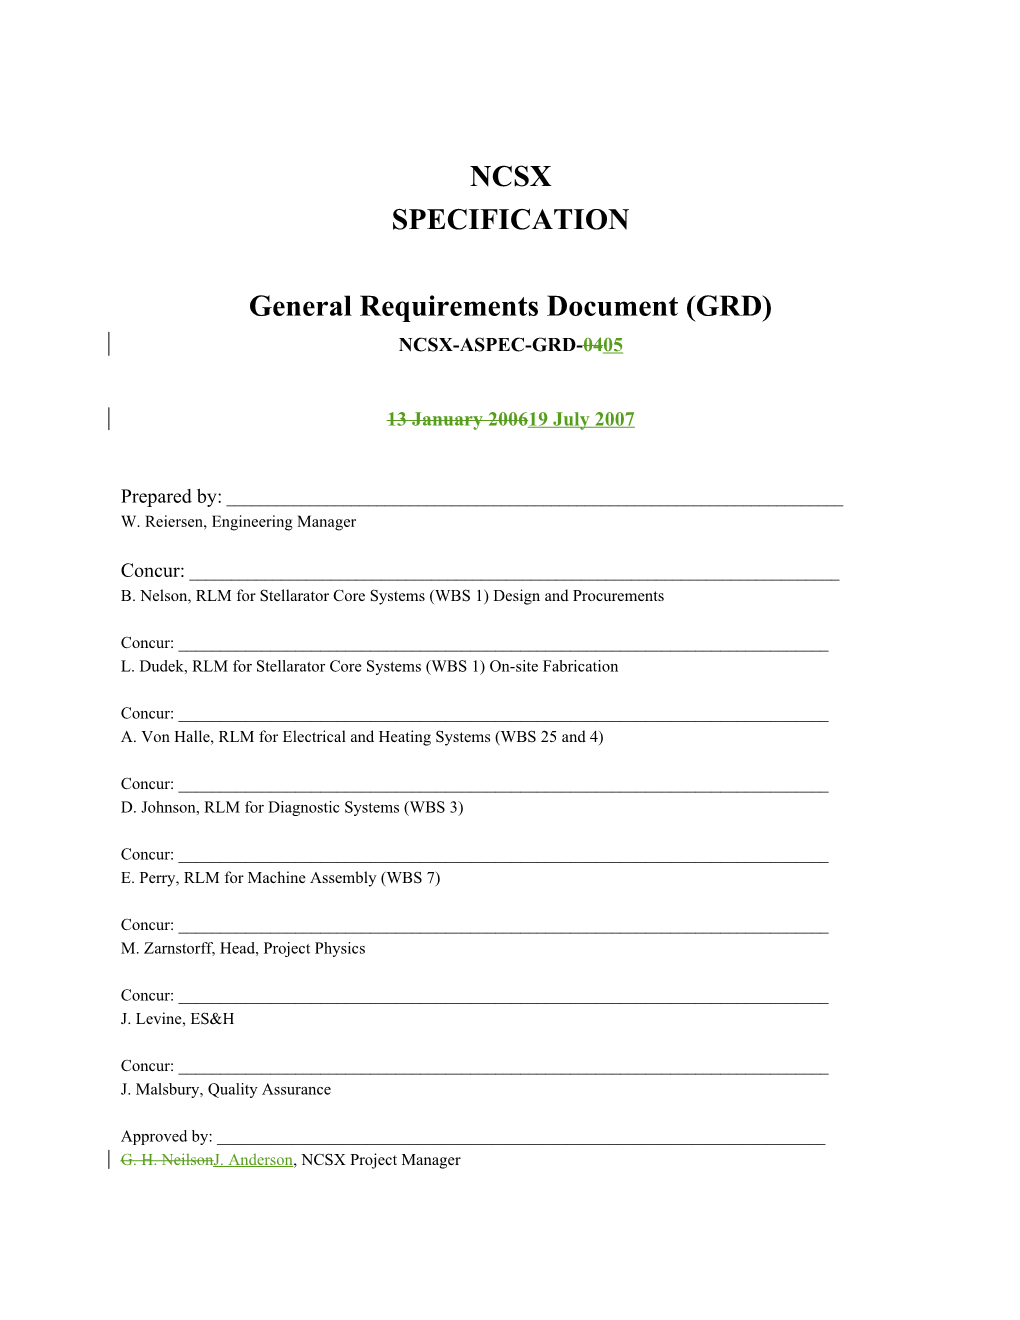 General Requirements Document (GRD)